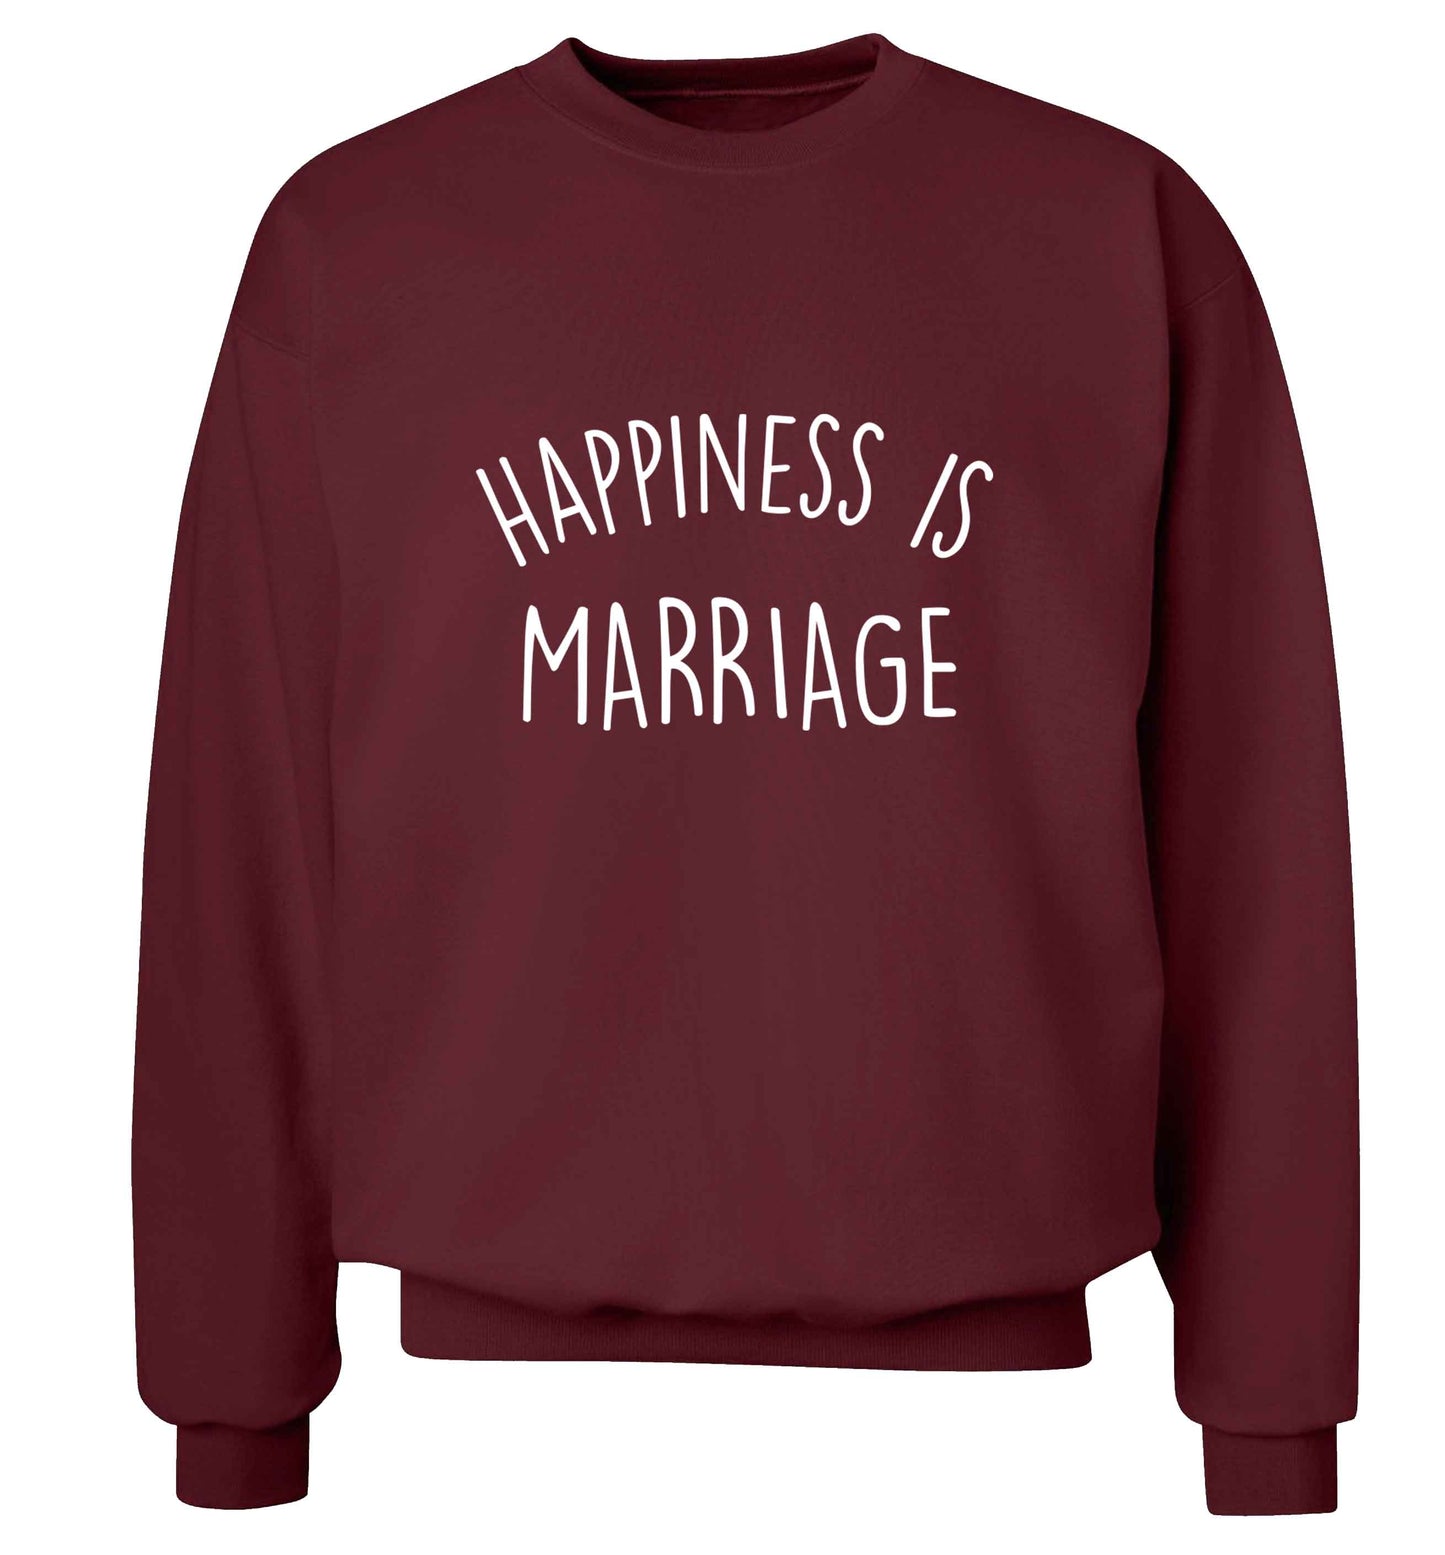 Happiness is marriage adult's unisex maroon sweater 2XL